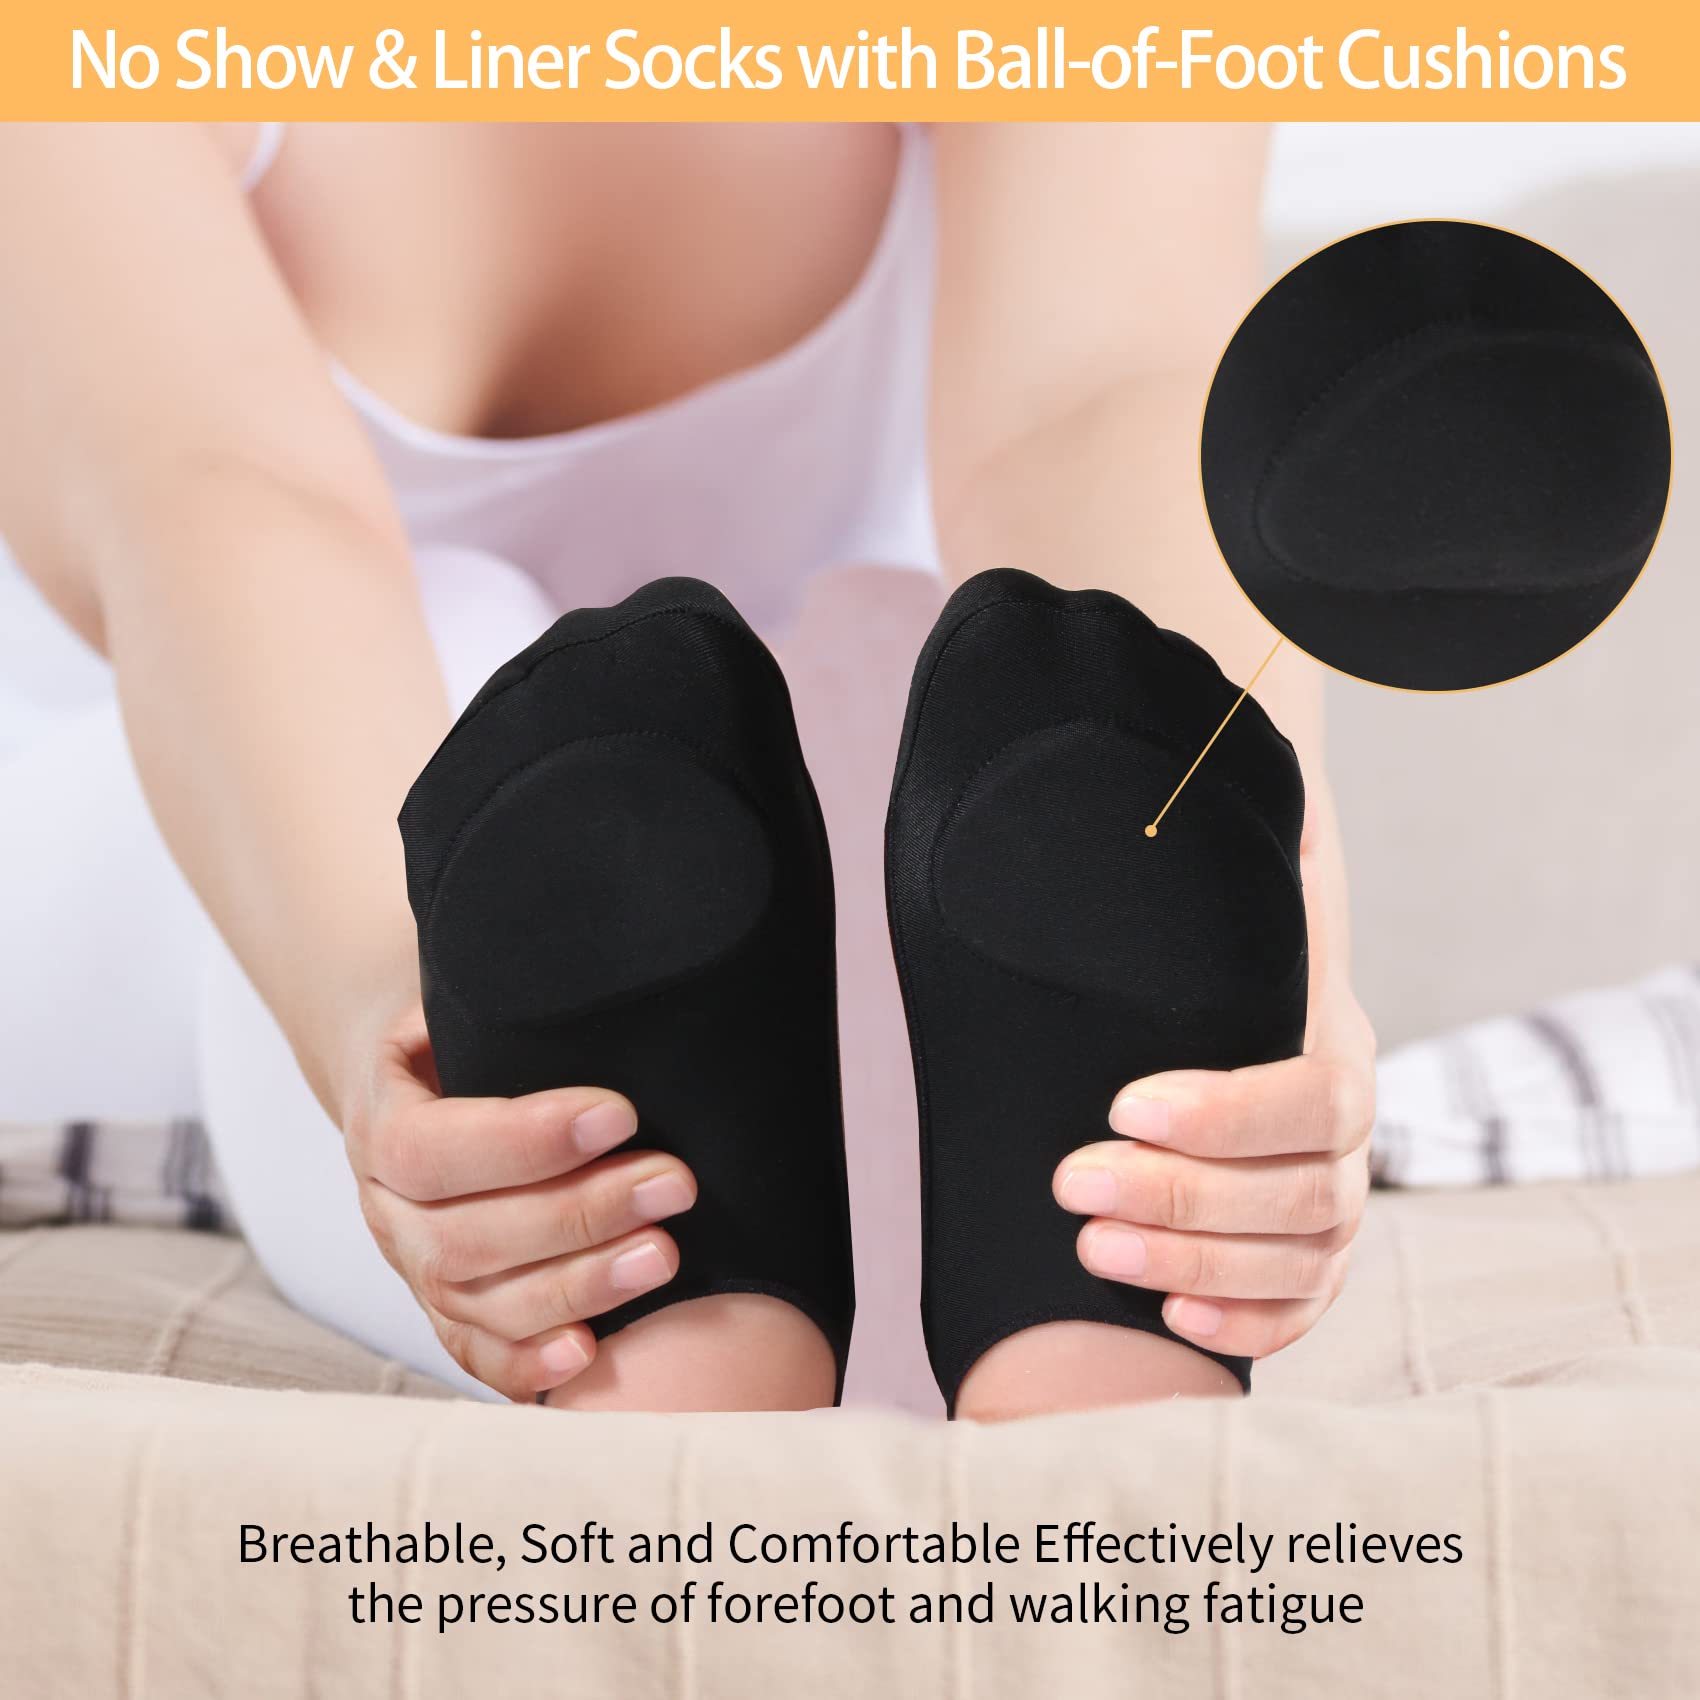 🔥2023 MOTHER'S DAY SALE- Sock-Style Ball of Foot Cushions for Women- Buy 3 Get 1 Free